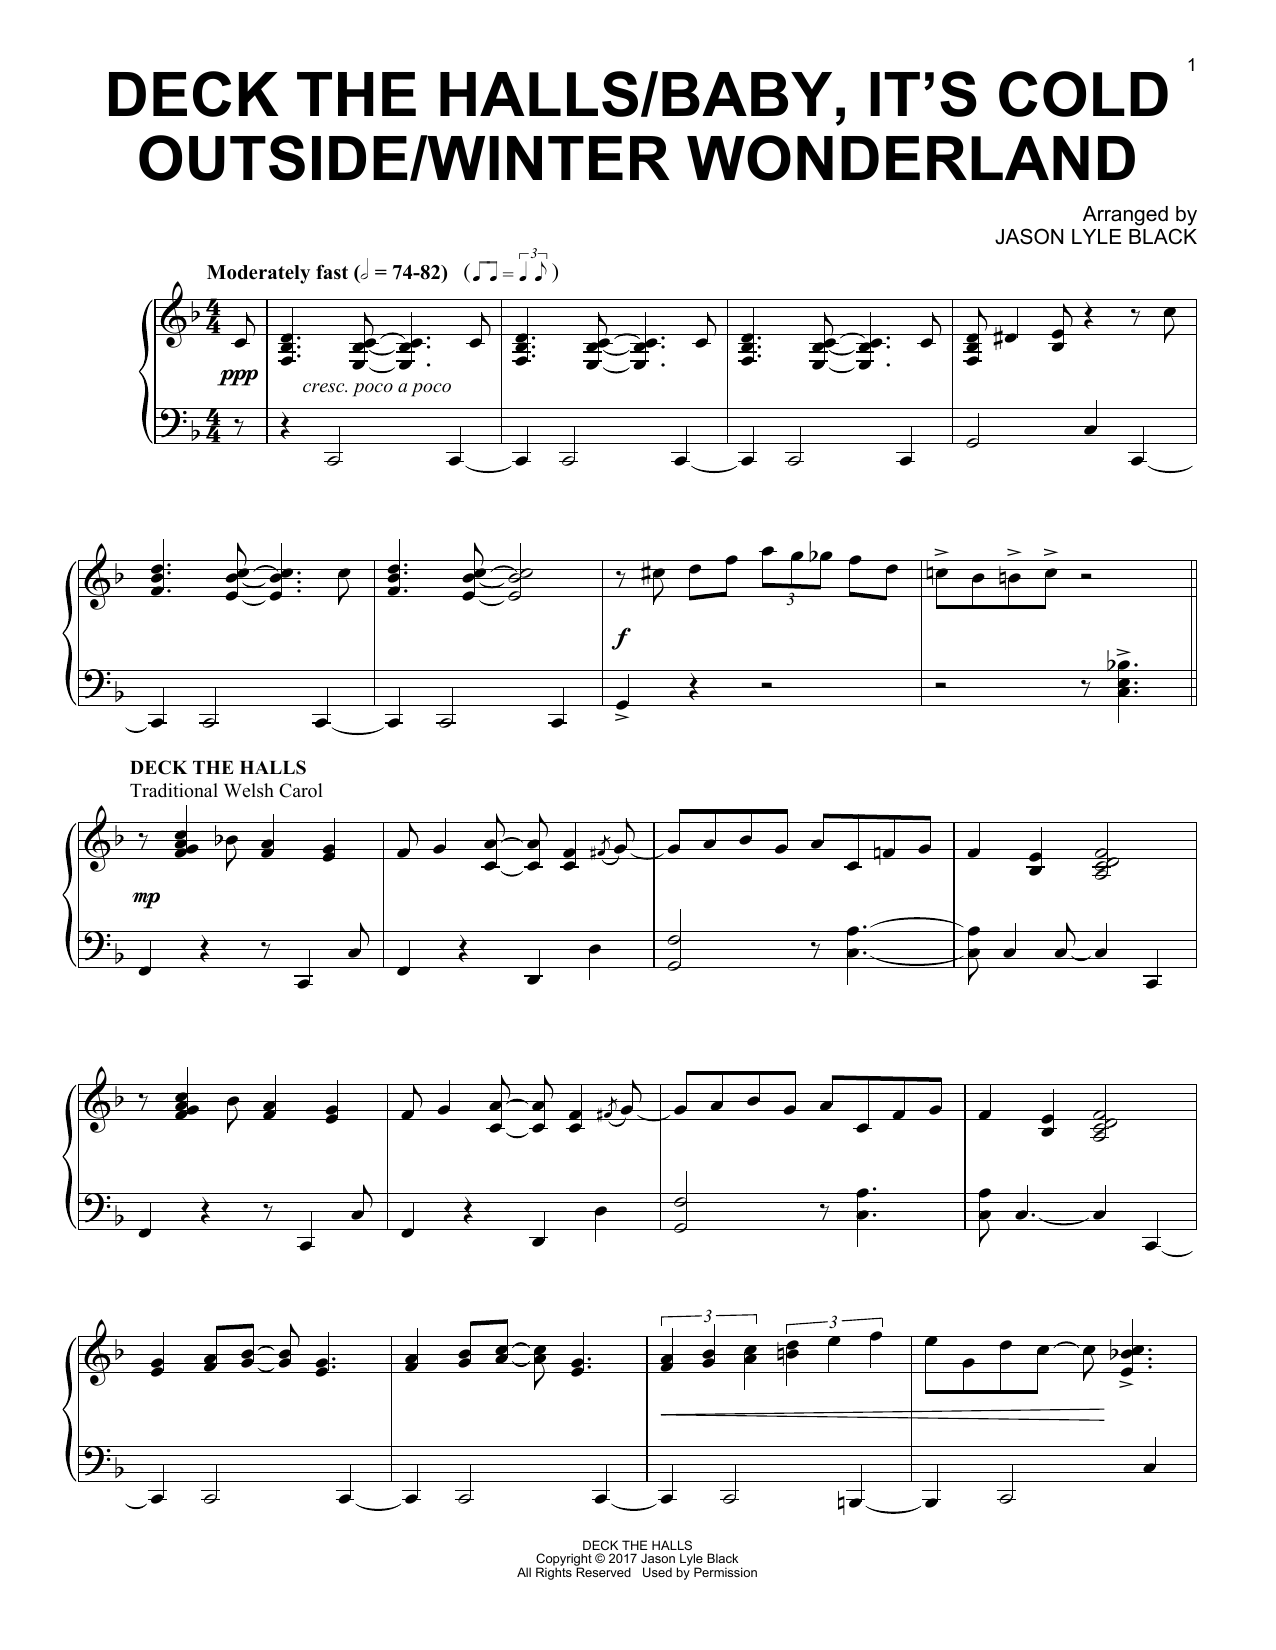 Download Jason Lyle Black Deck The Halls/Baby, It's Cold Outside/ Sheet Music